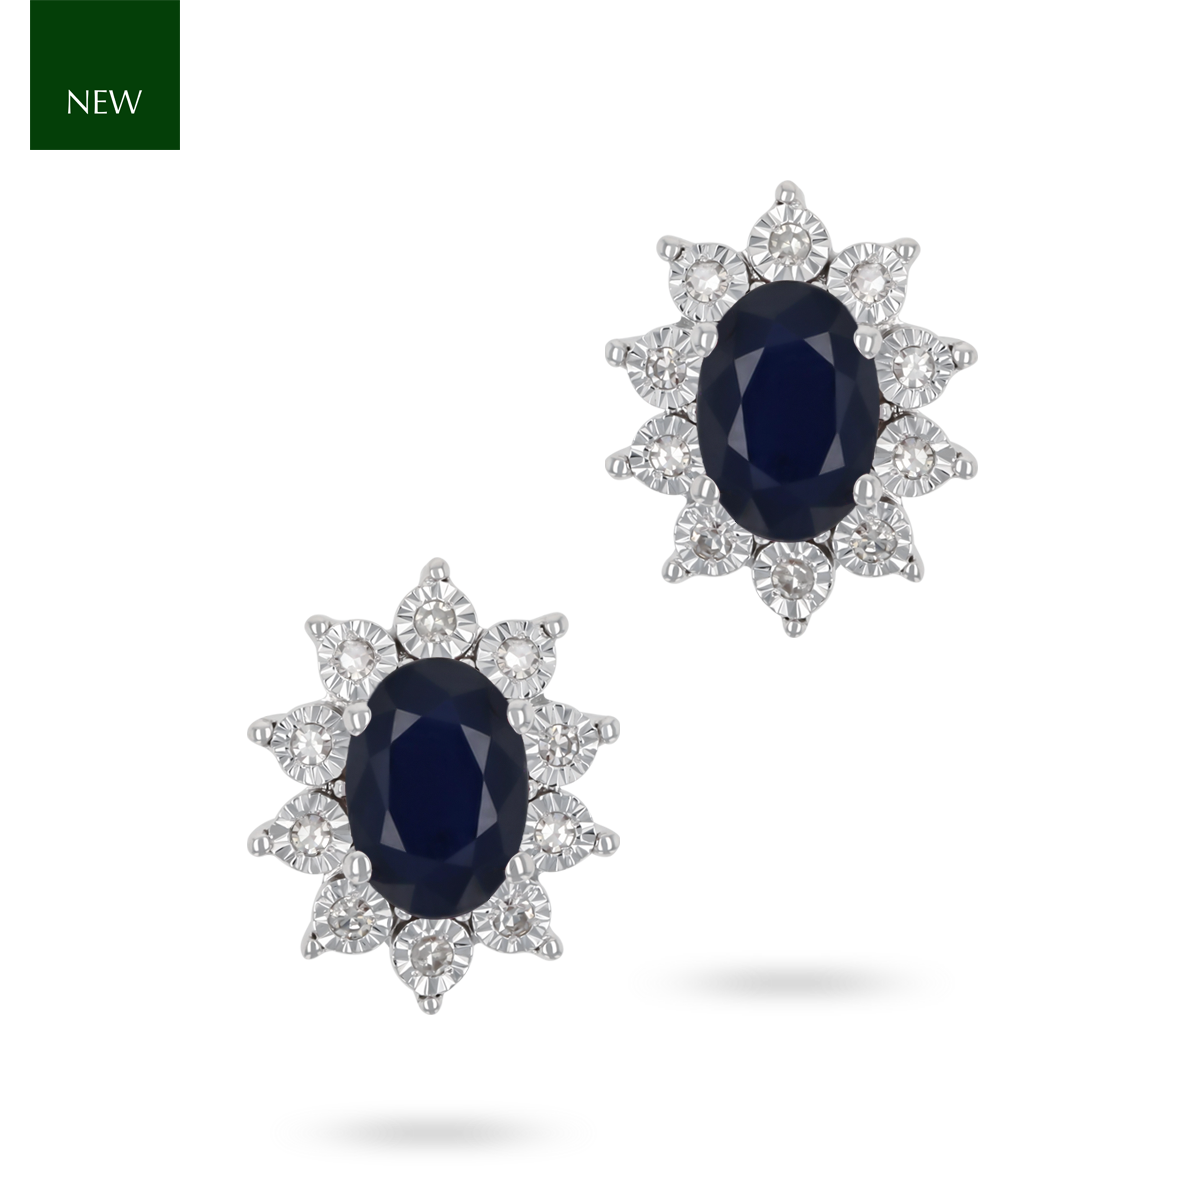 9ct White Gold Oval Sapphire & Diamond Cluster Stud Earrings